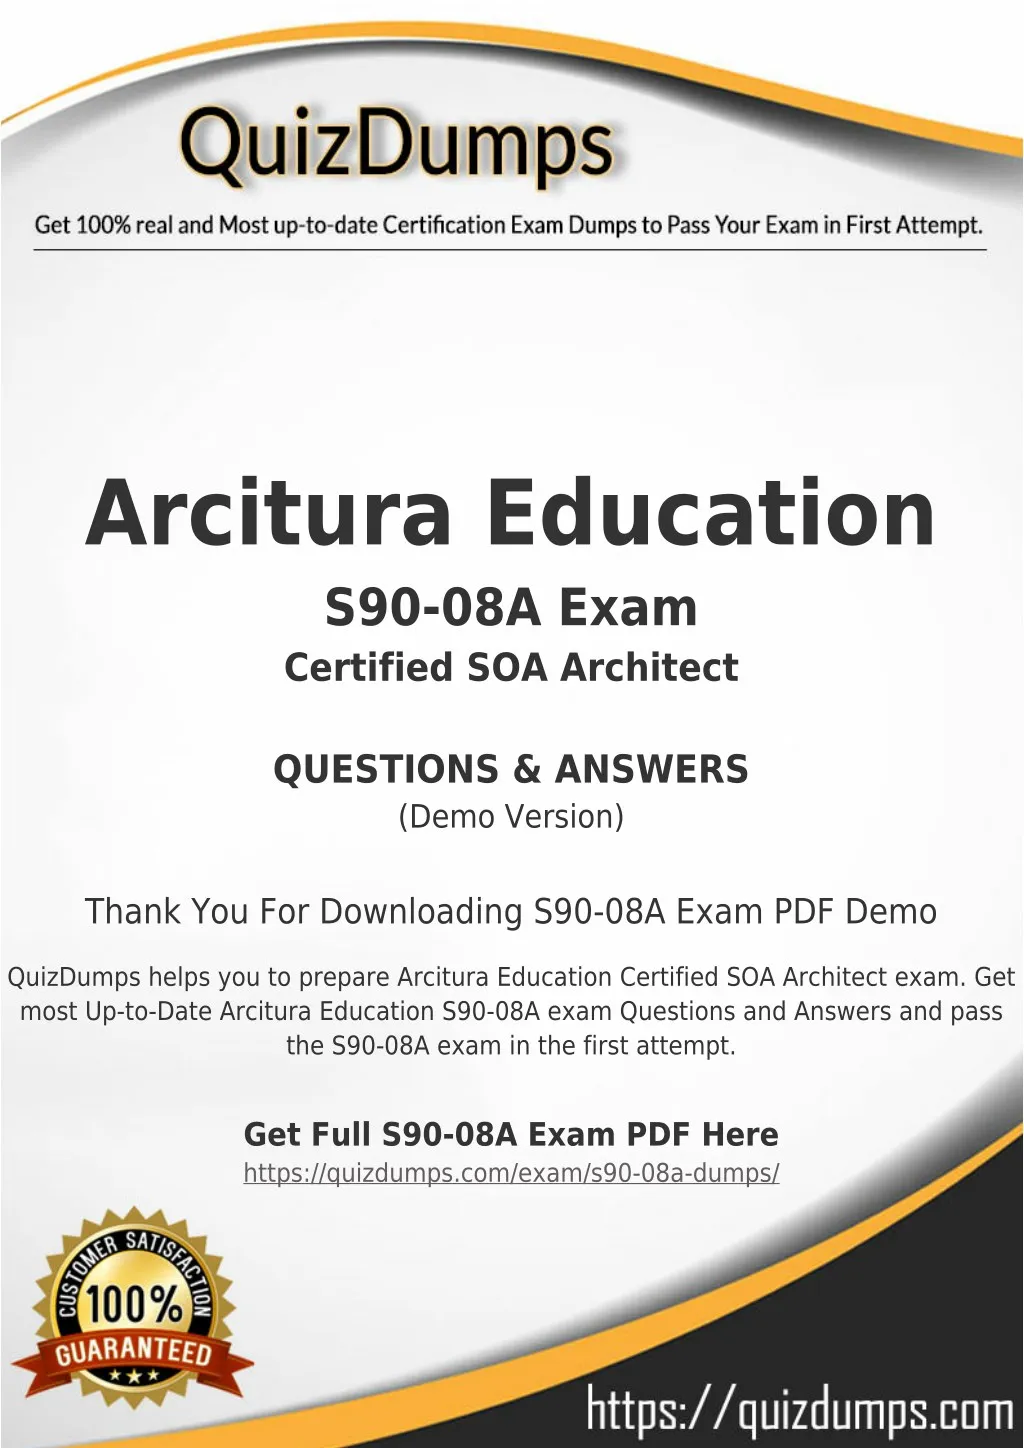 arcitura education s90 08a exam certified